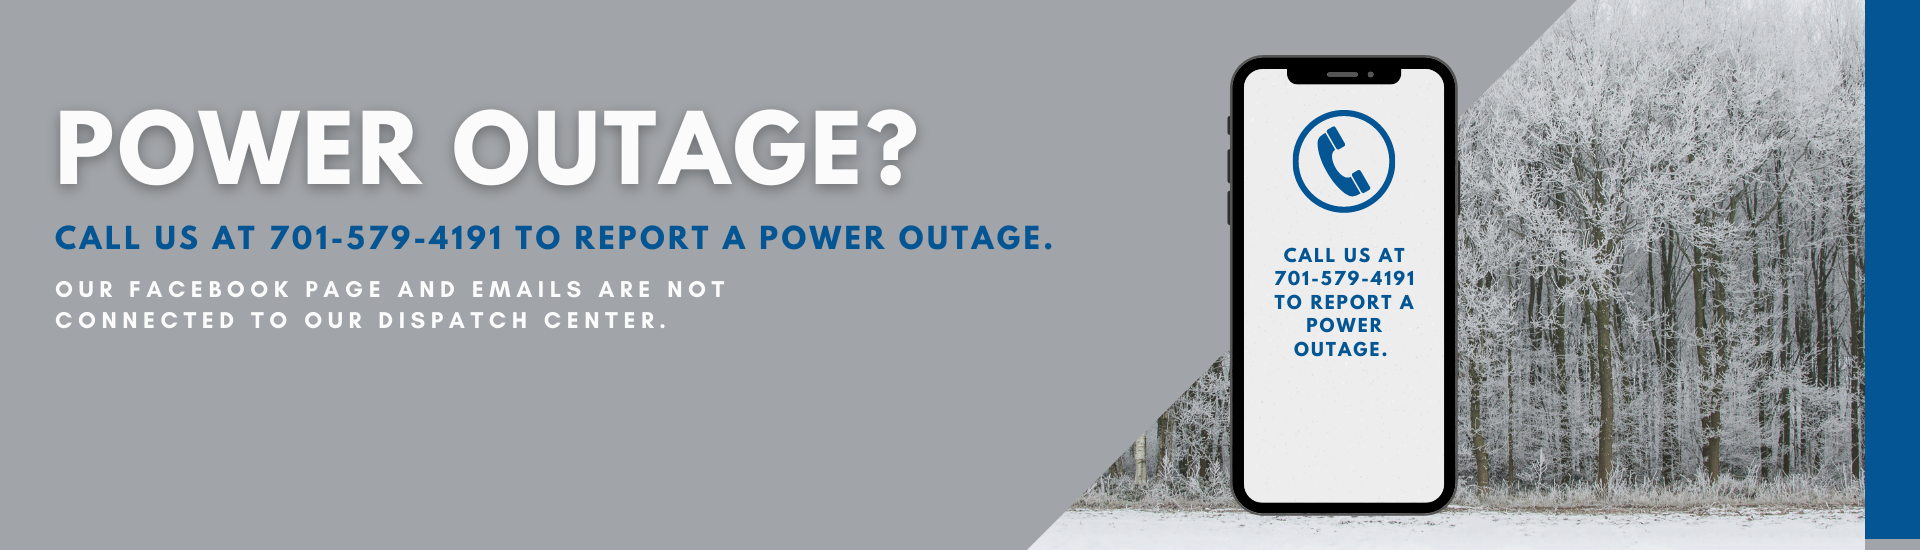 Winter Power Outage